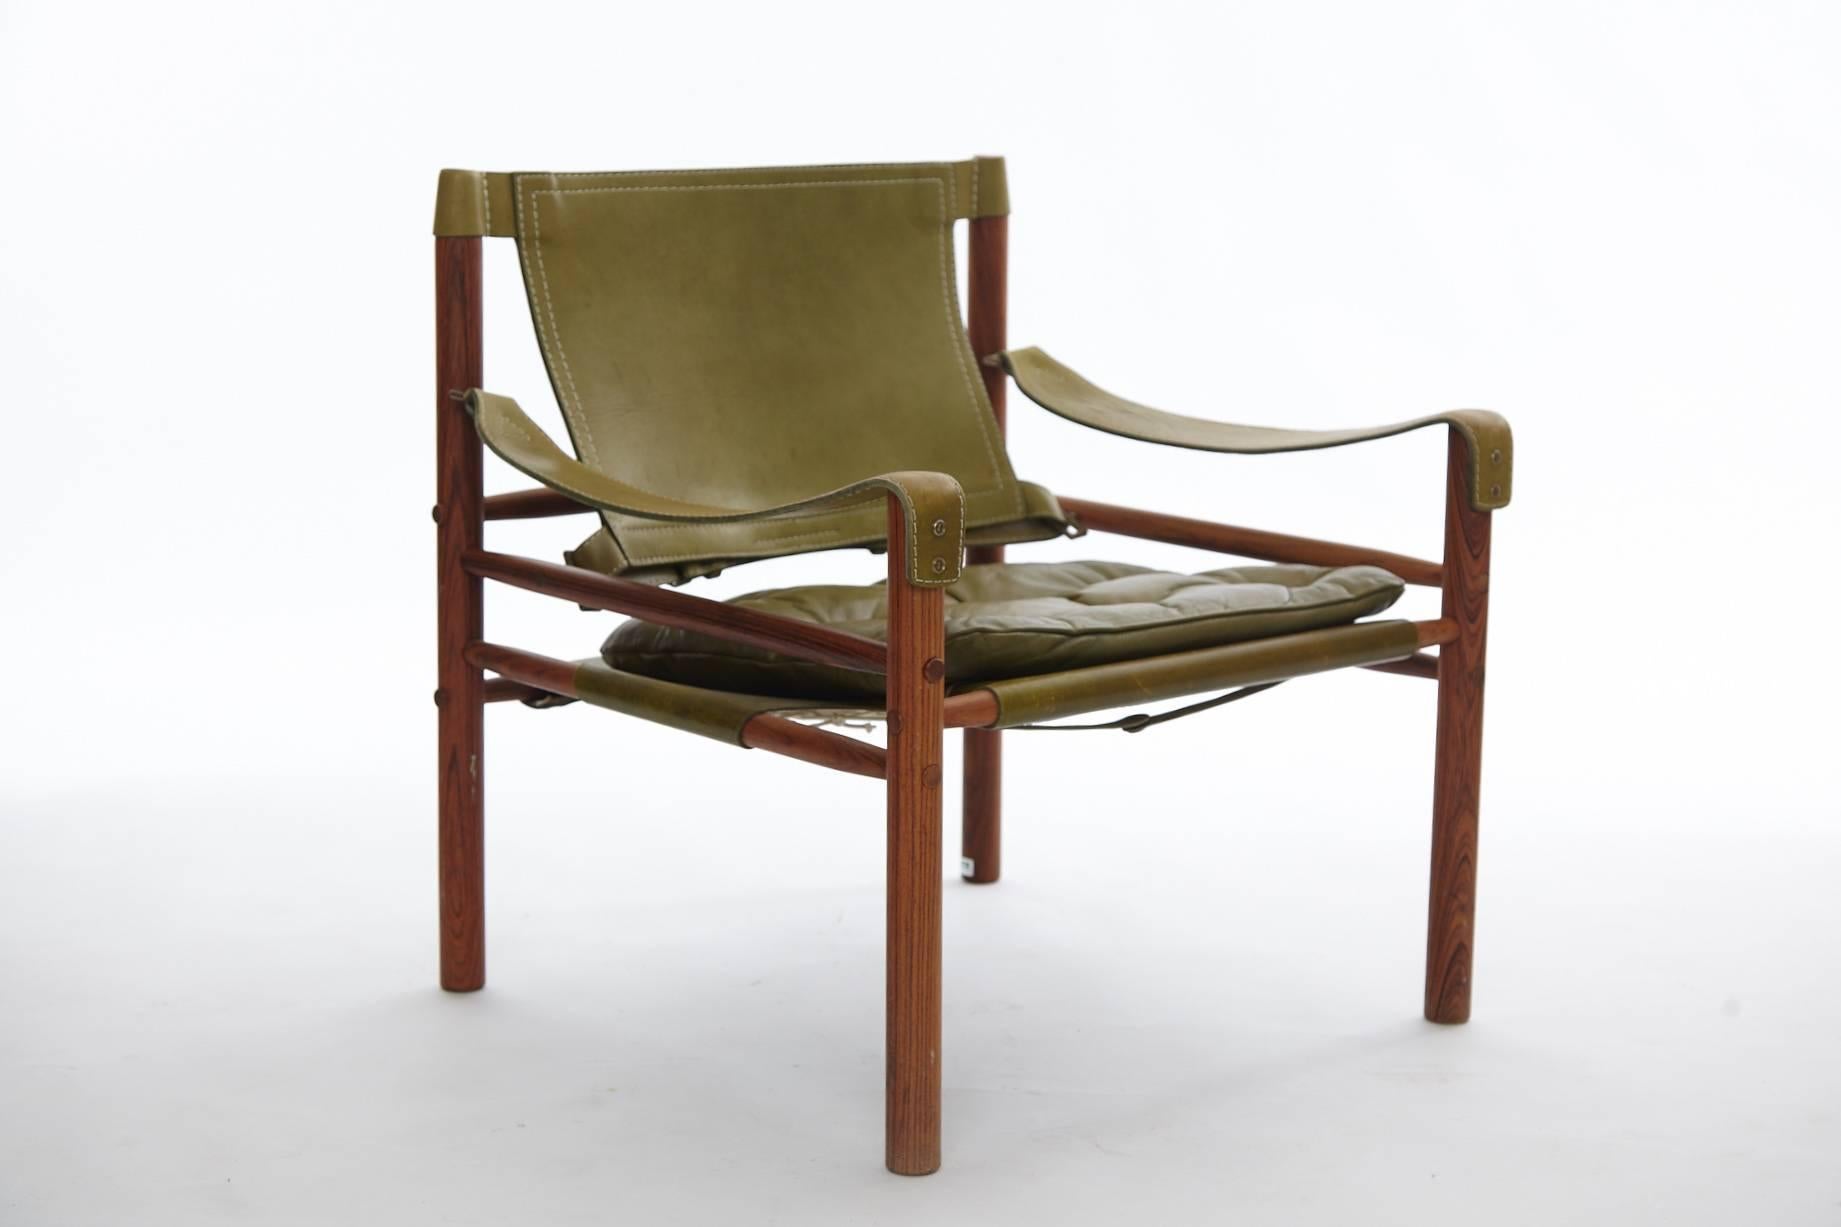 Arne Norell safari chair, green leather and rosewood, Sweden, 1970s.